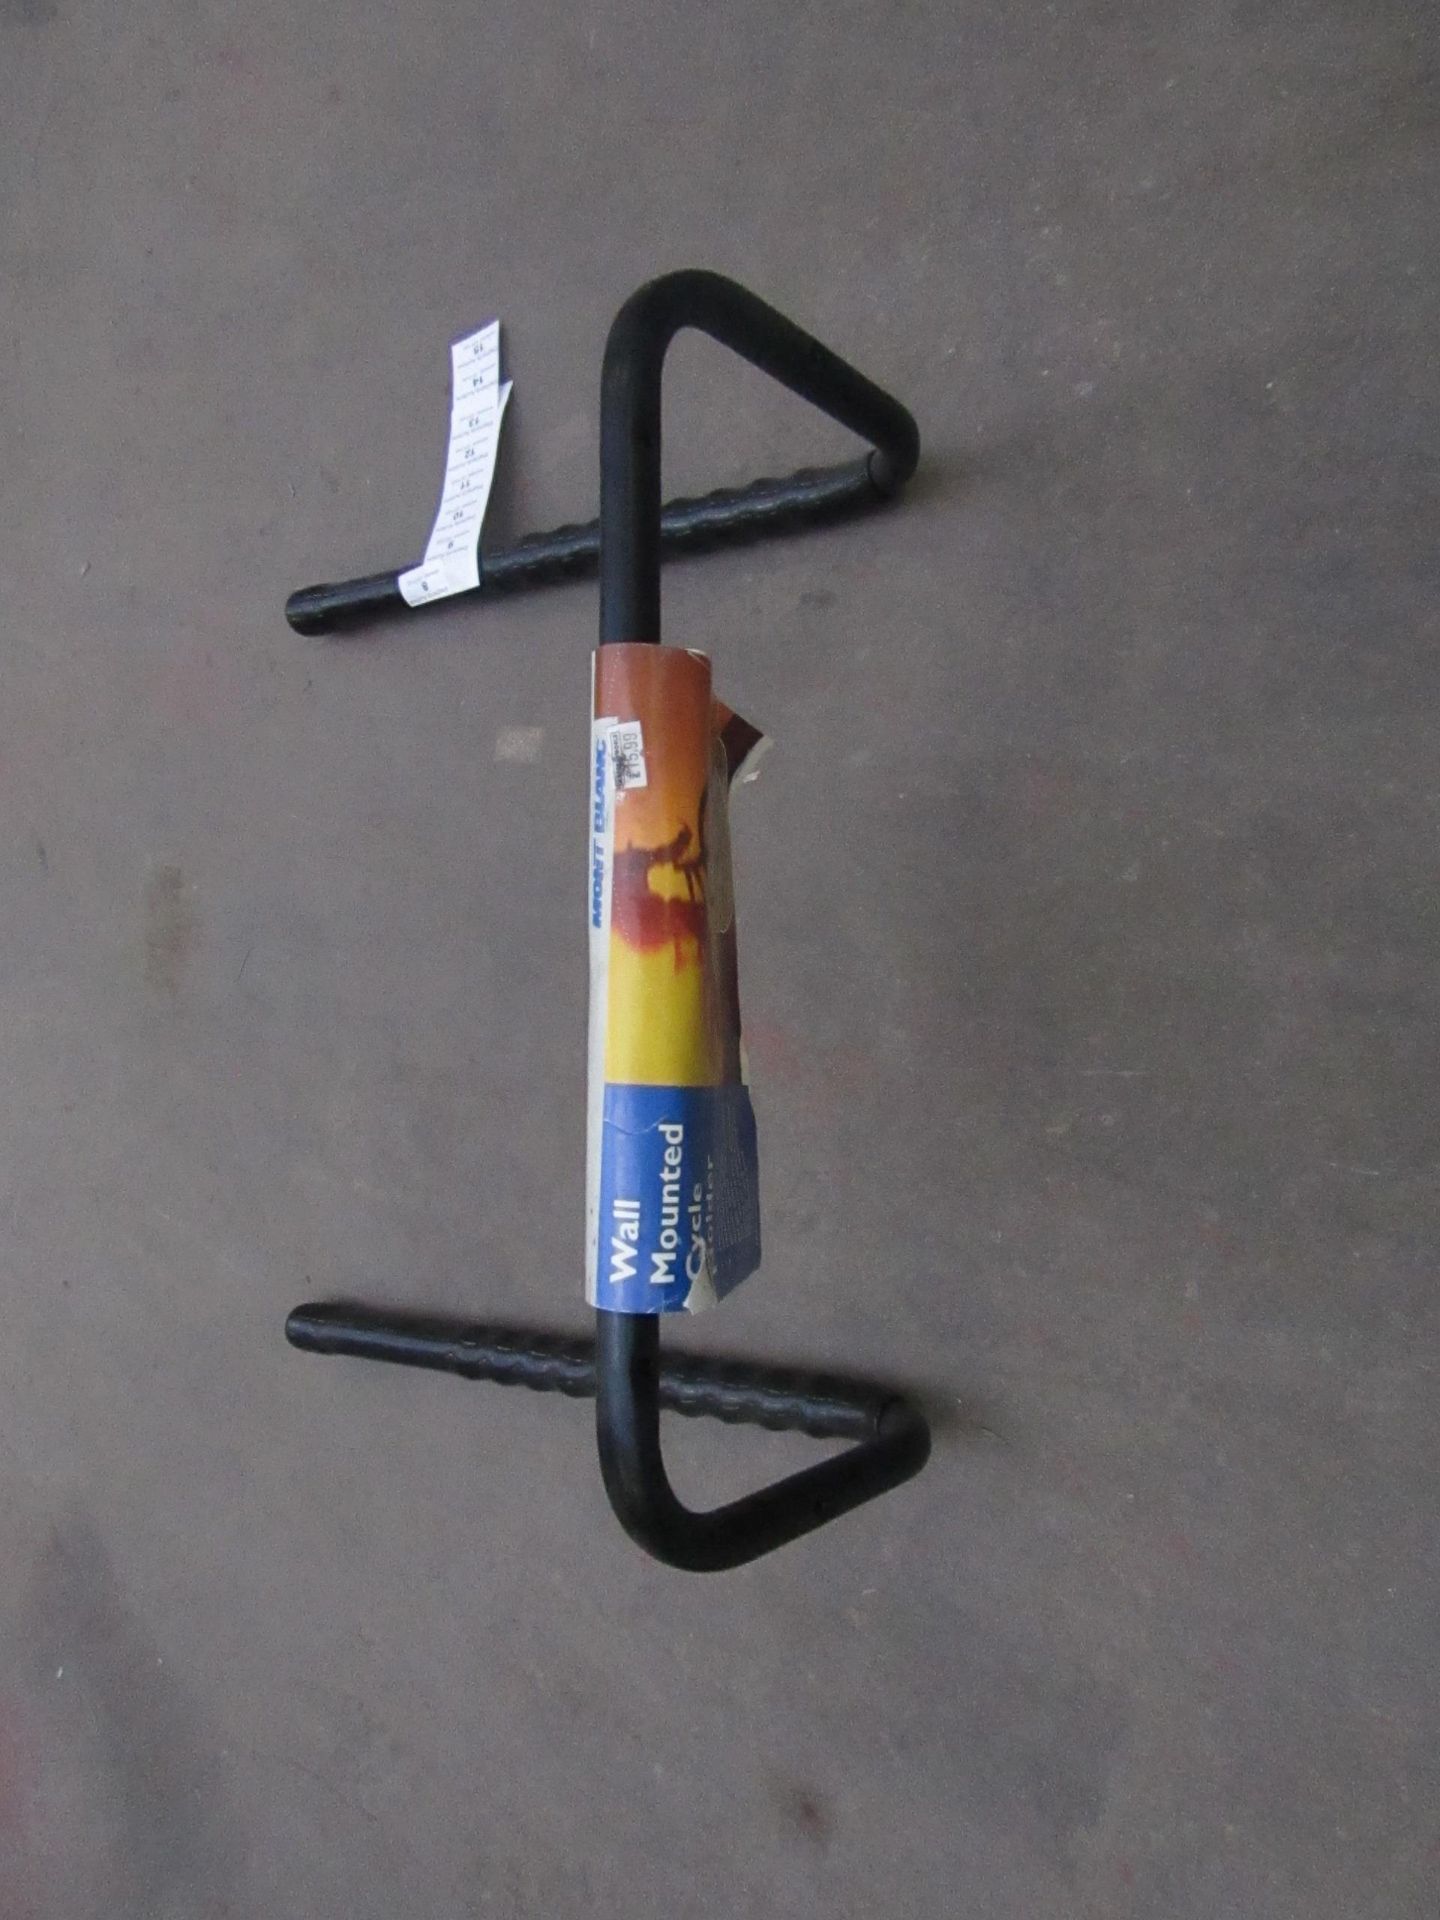 Mont Blanc - Wall Mounted Bicycle Holder - Unused.